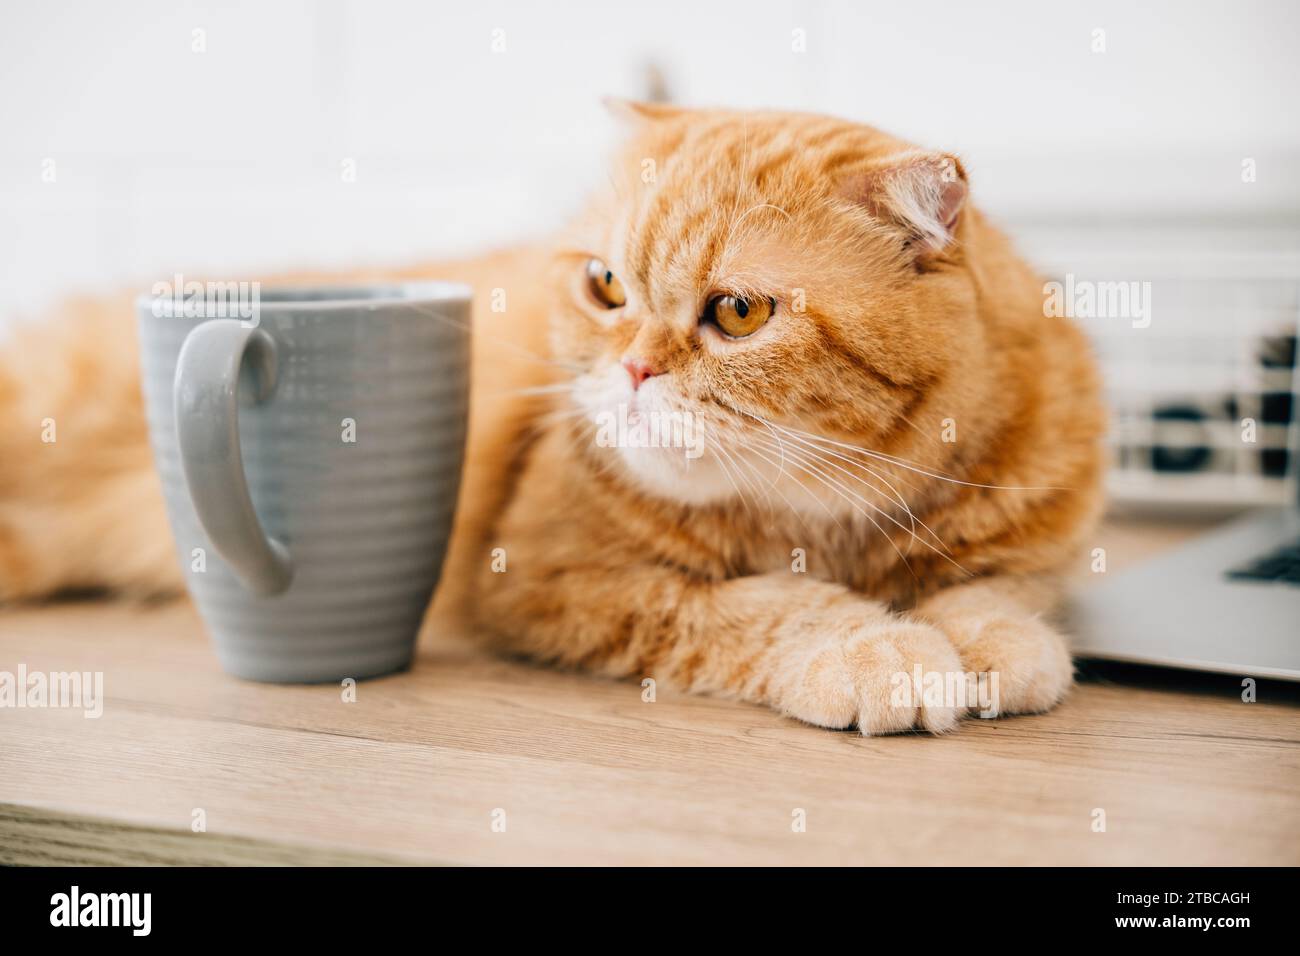 Scottish Fold cat, cute and furry, sits on a table by a coffee cup, croissant, and business Stock Photo